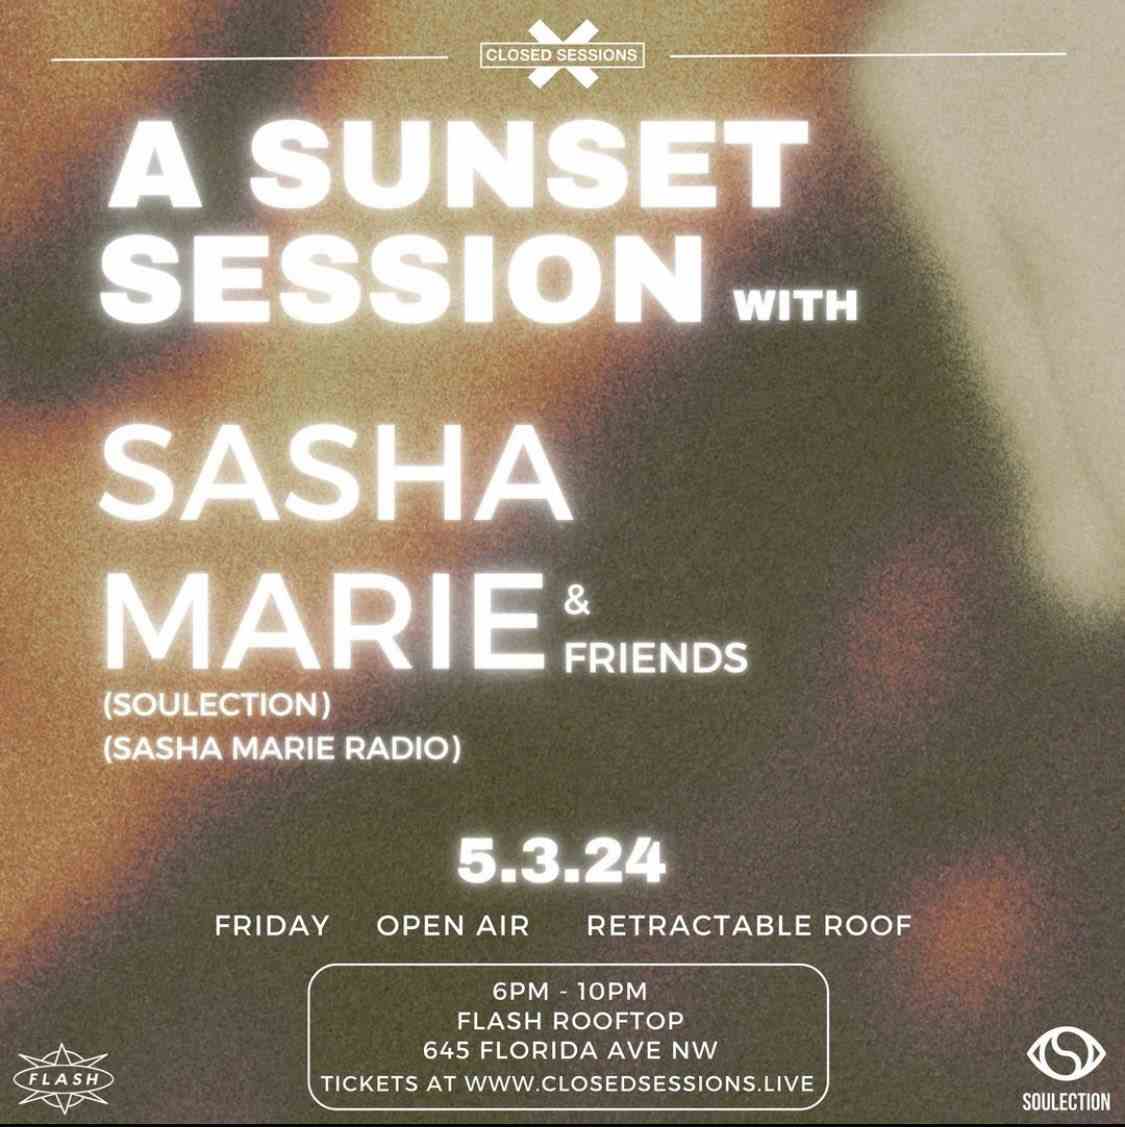 A Sunset Session with Sasha Marie & Friends @ Flash Rooftop (6-10pm) event flyer